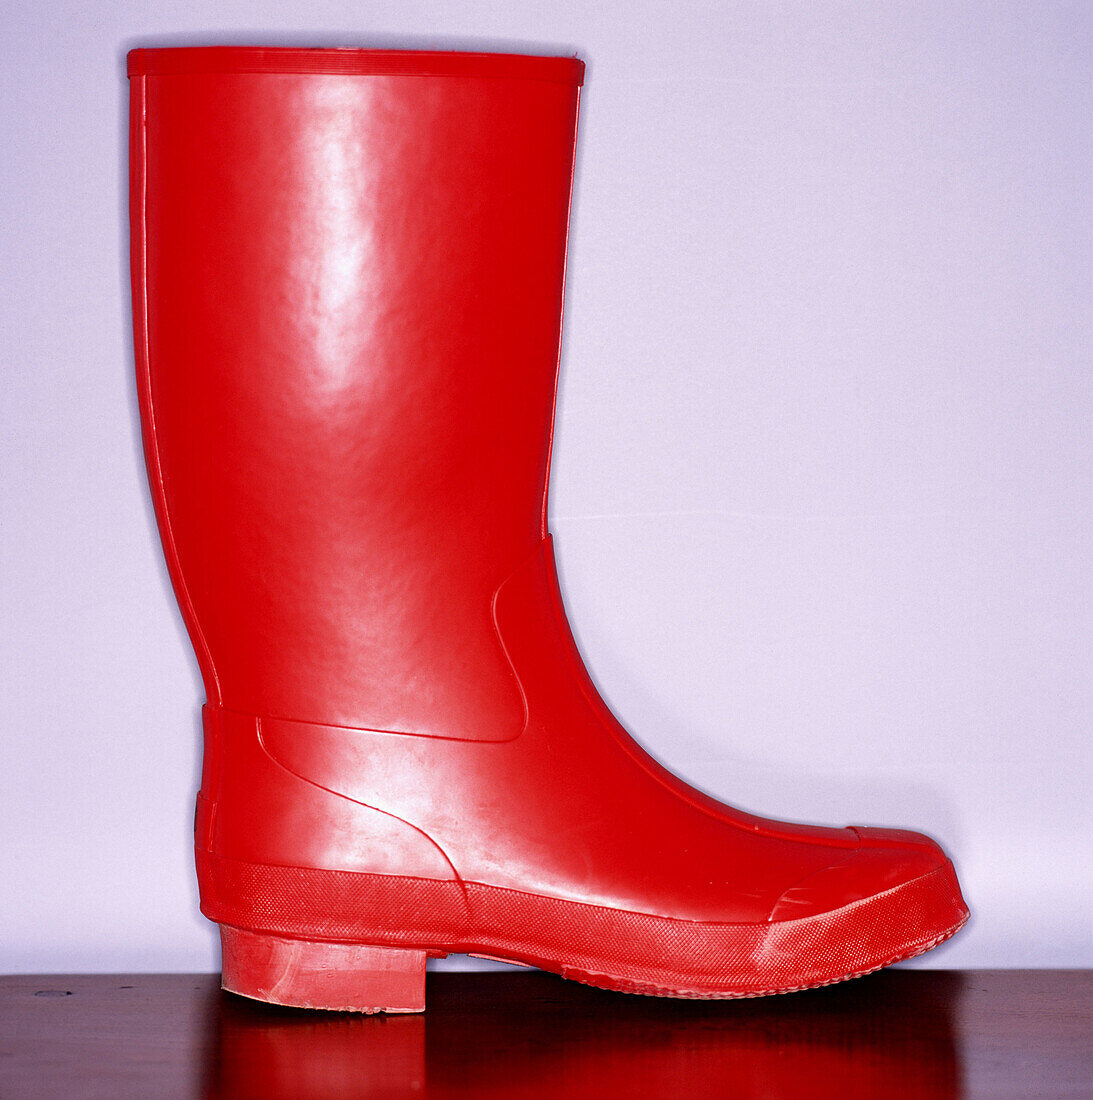 Boot, Boots, Close up, Close-up, Closeup, Color, Colour, Concept, Concepts, Detail, Details, Footgear, Footwear, Galosh, Galoshes, Indoor, Indoors, Inside, Interior, Object, Objects, One, One item, Rain, Rainboot, Red, Rubber boot, Rubber boots, Square, S